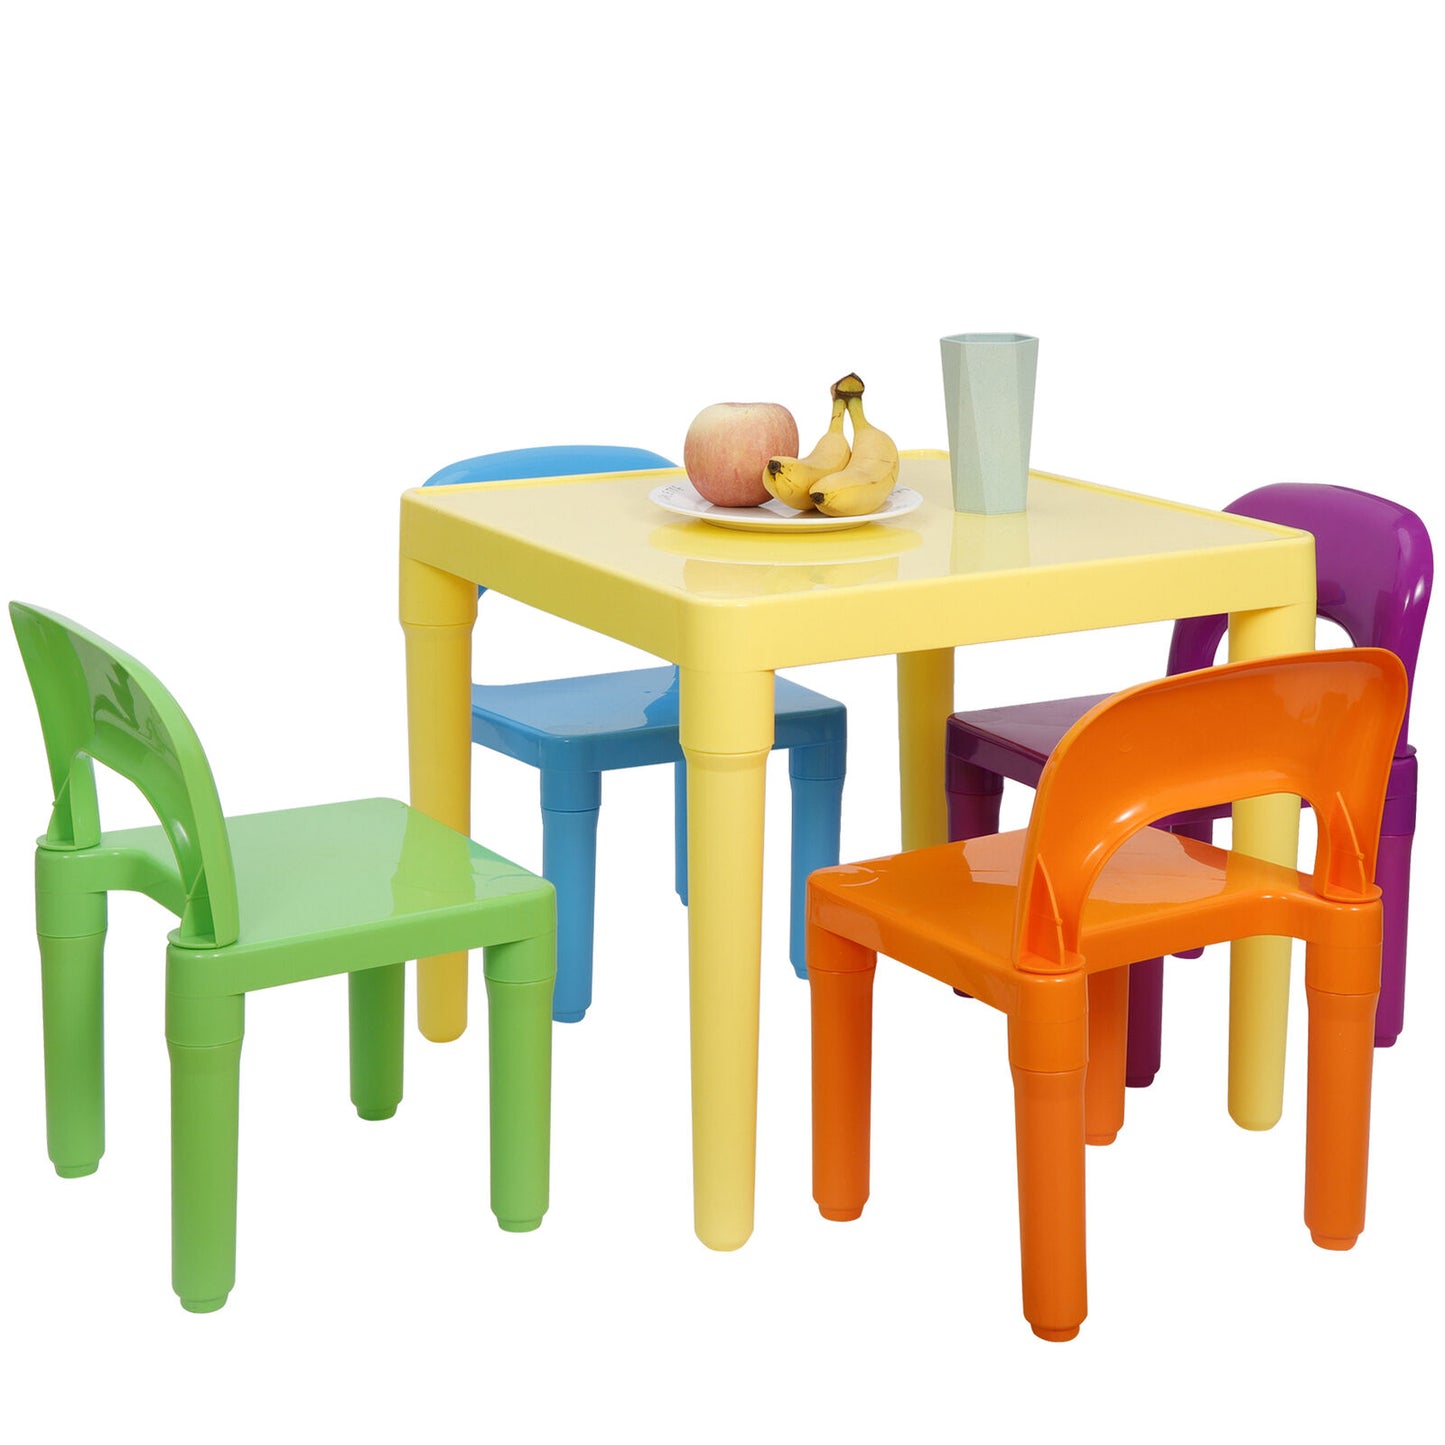 KidsTable  4 Chair Play Build Table Set for Indoor Activity Outdoor Water Play